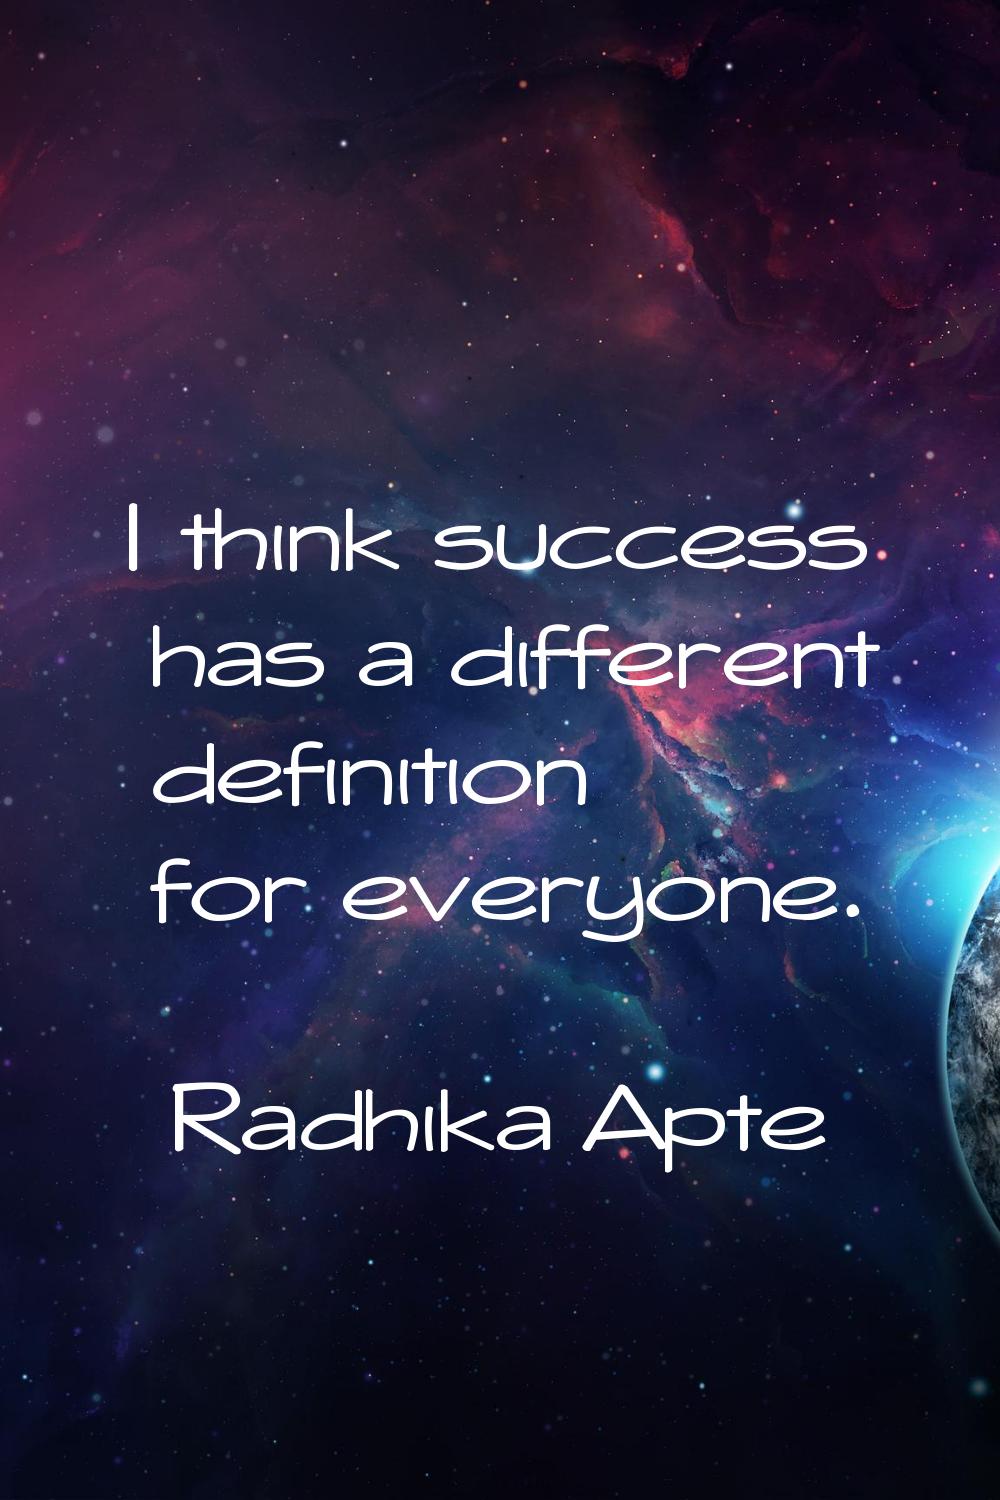 I think success has a different definition for everyone.